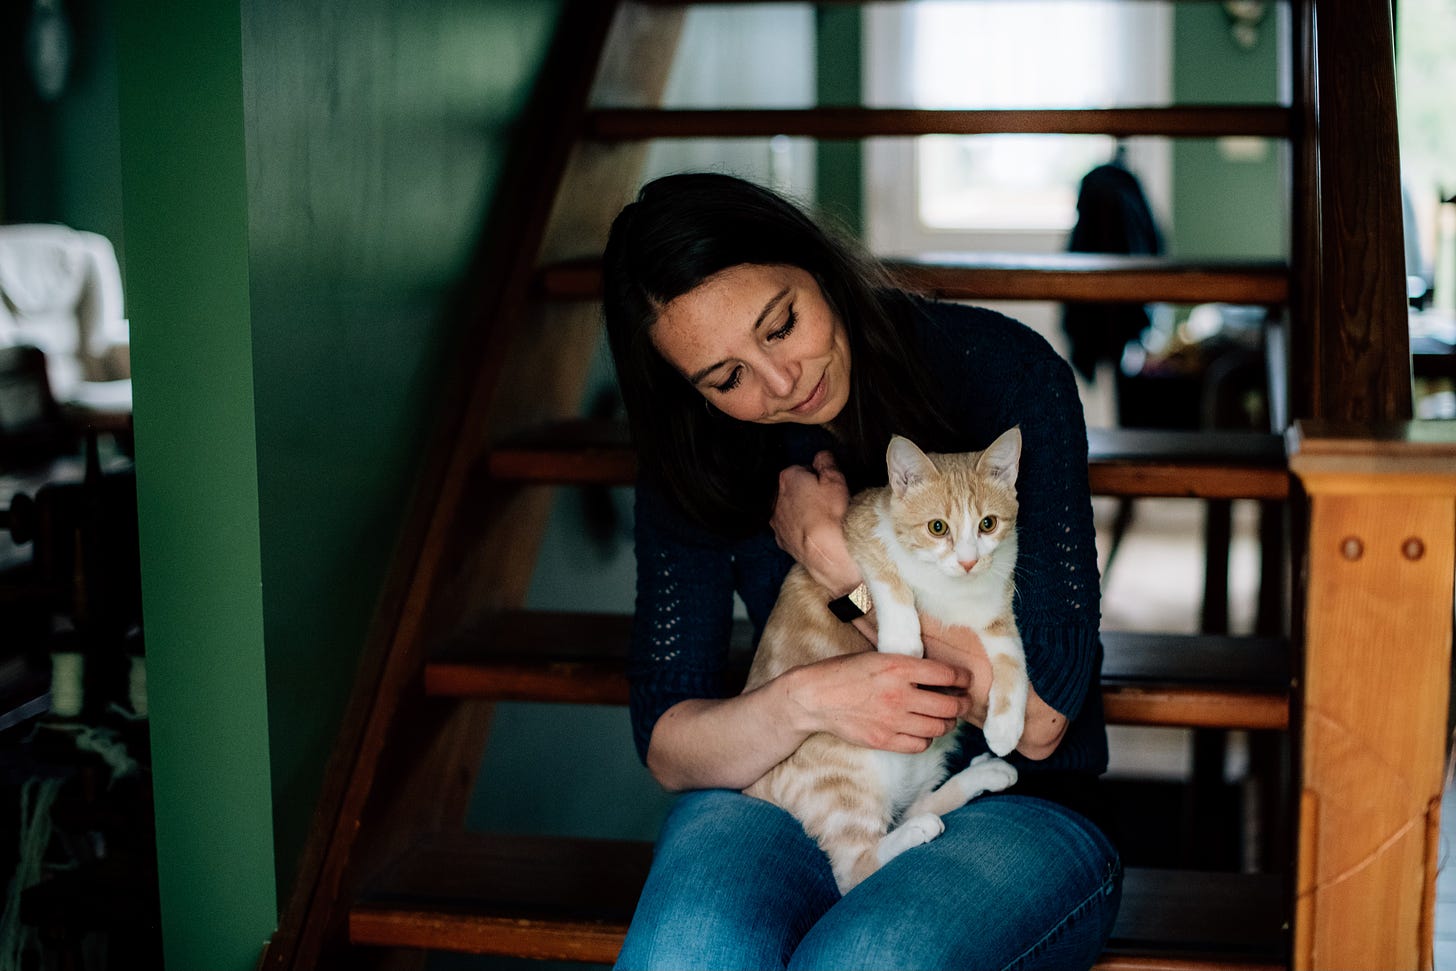 Woman sits on stairs cuddling an orange tabby cat